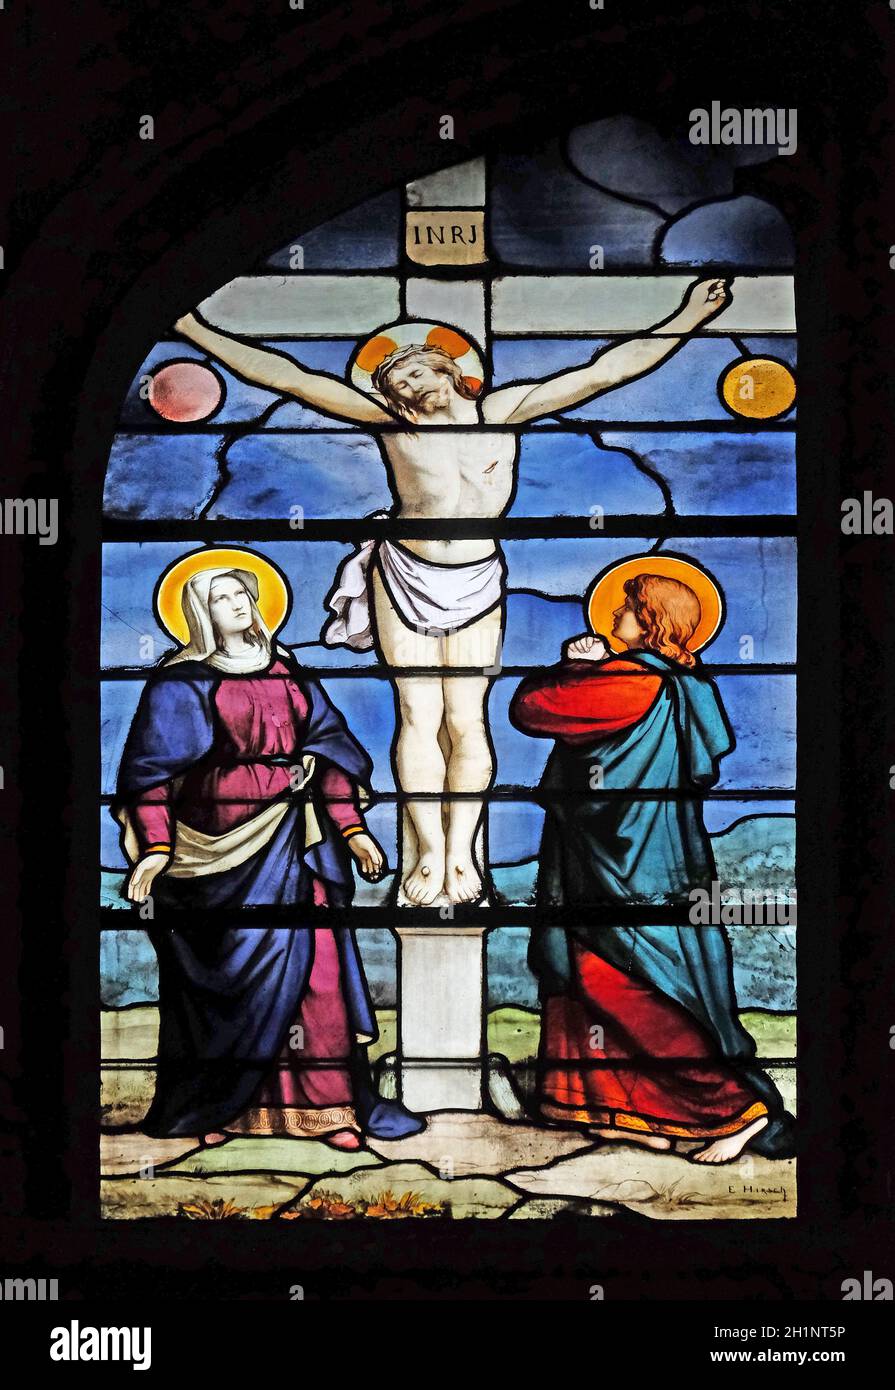 Virgin Mary and Saint John under the Cross, stained glass window in Saint Severin church in Paris, France Stock Photo